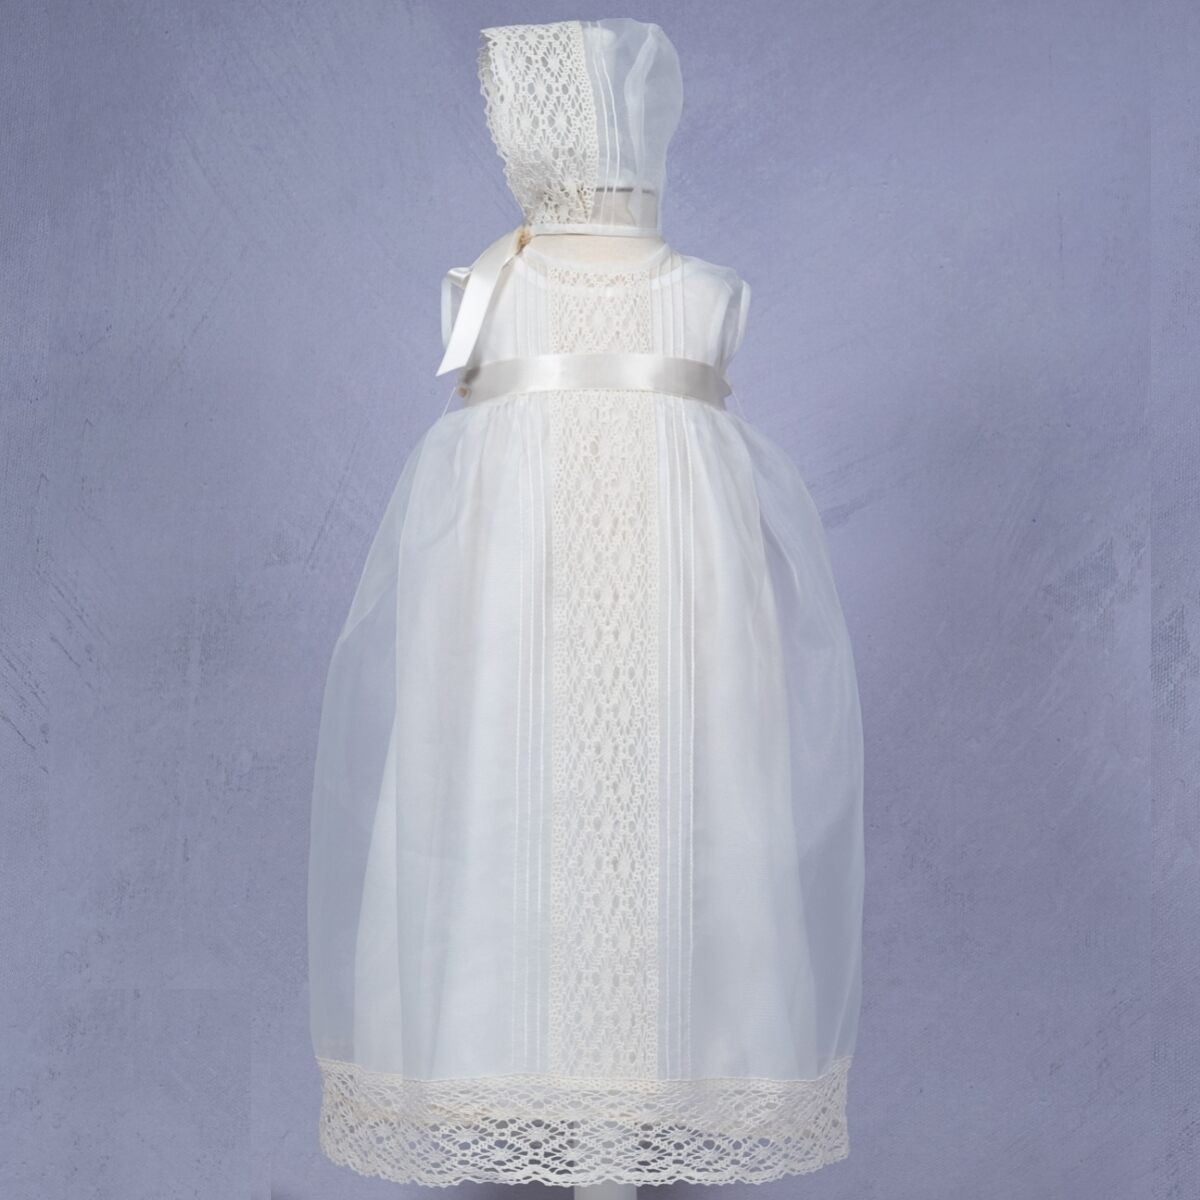 CHRISTENING GOWN WITH LACE AND BONNET MISHA BABY - 3